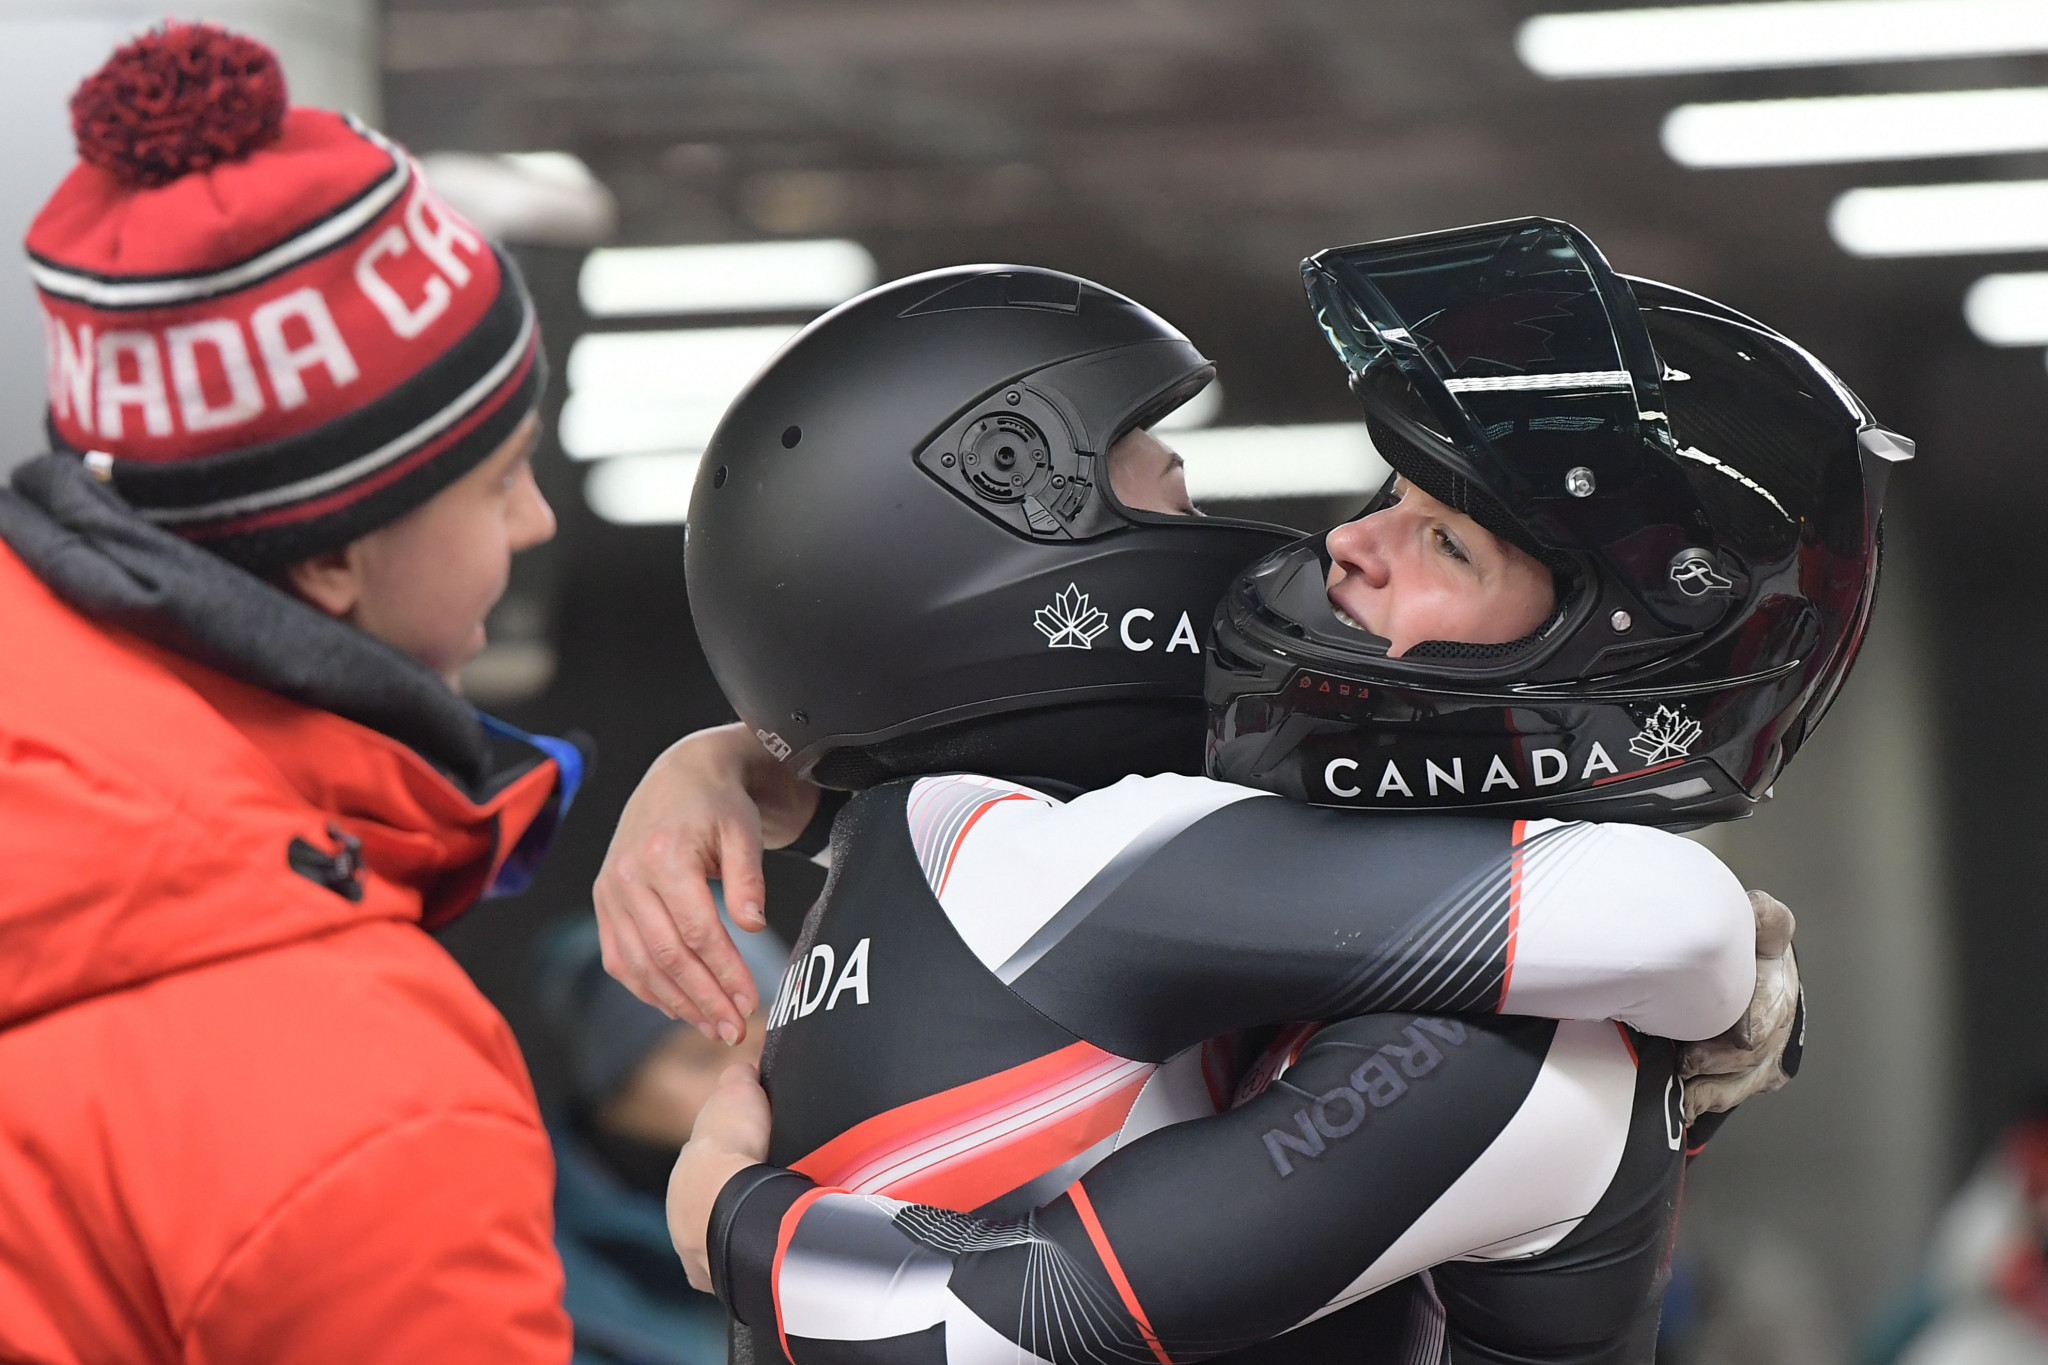 Lotholz launches effort to become bobsleigh pilot